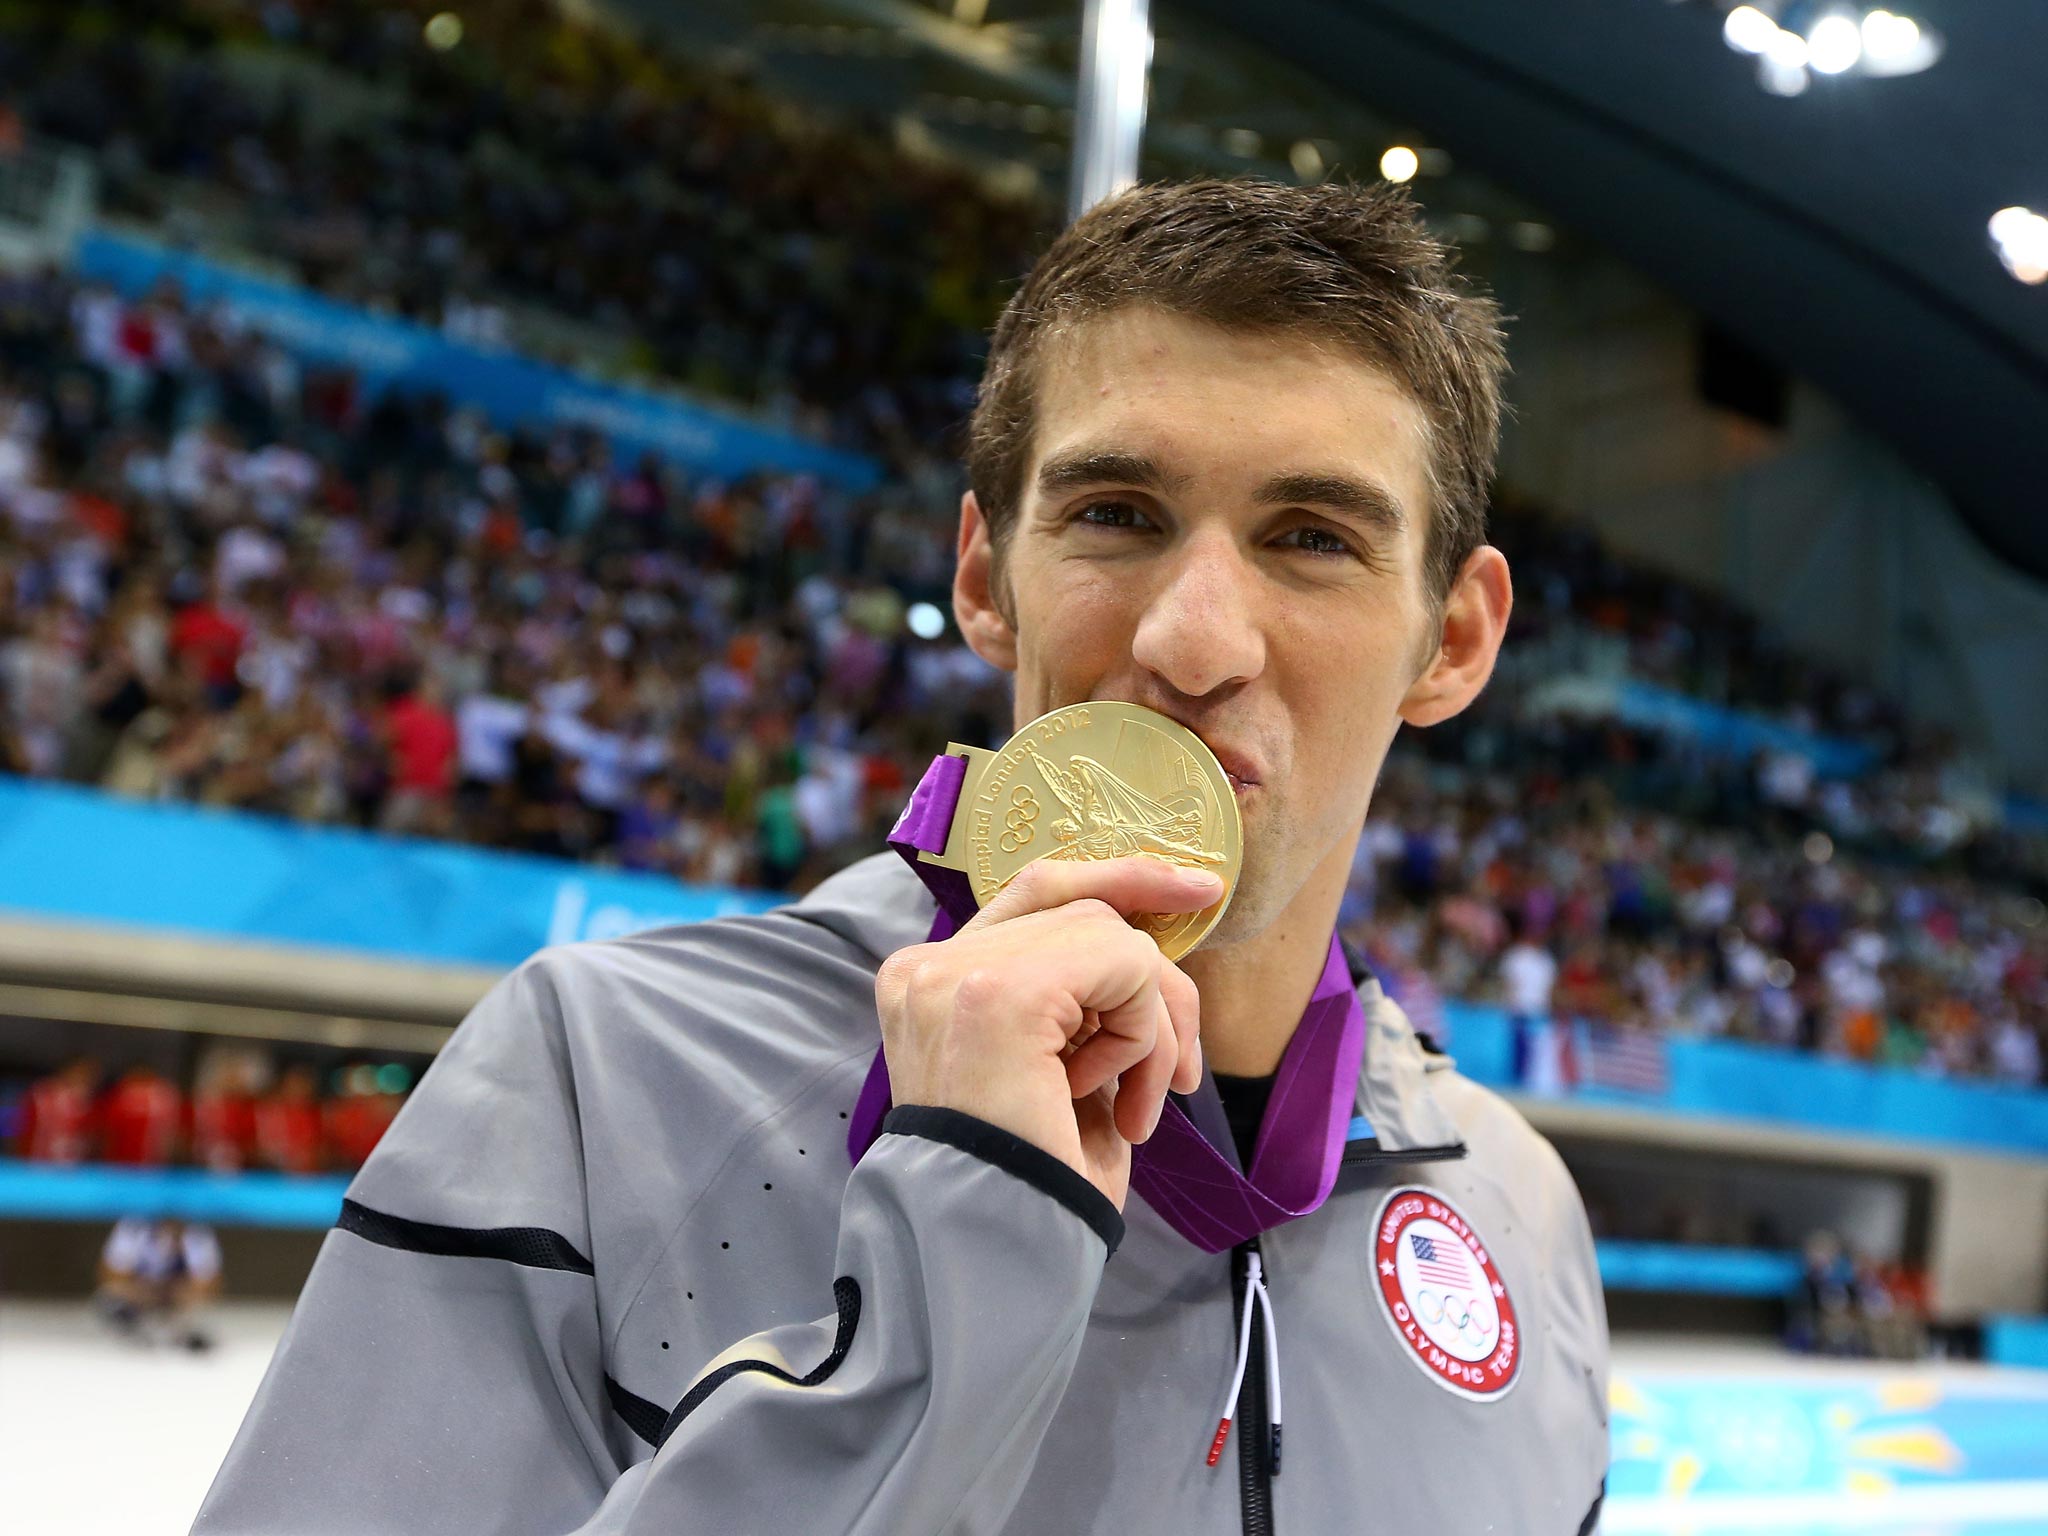 Michael Phelps will return to competitive swimming next week